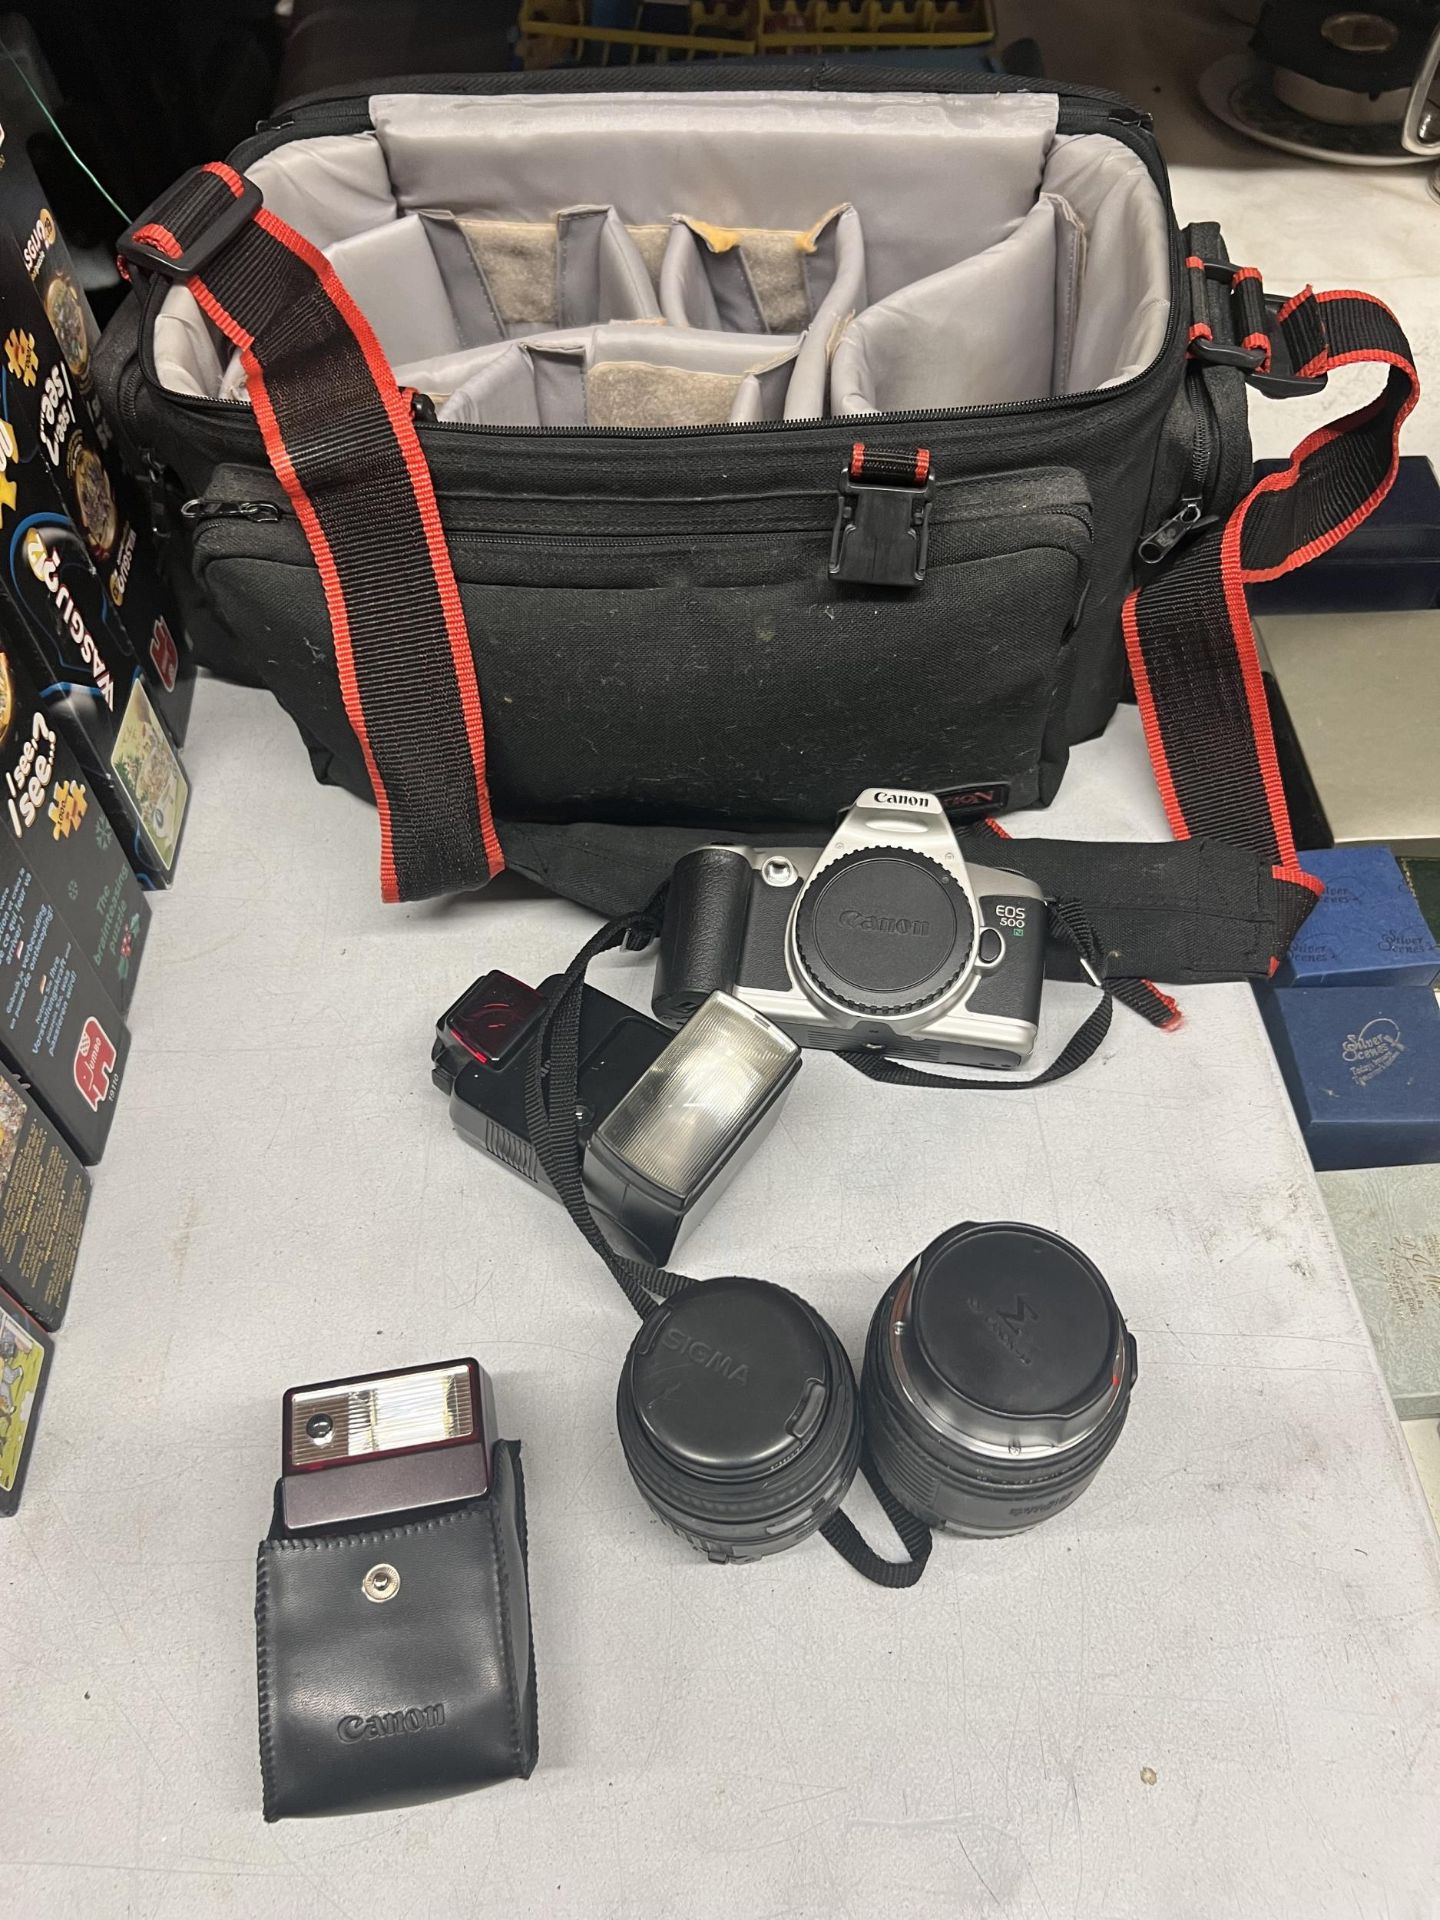 A CANON EOS 500 CAMERA WITH TWO EXTRA LENSES, TWO FLASHES AND A CAMERA BAG